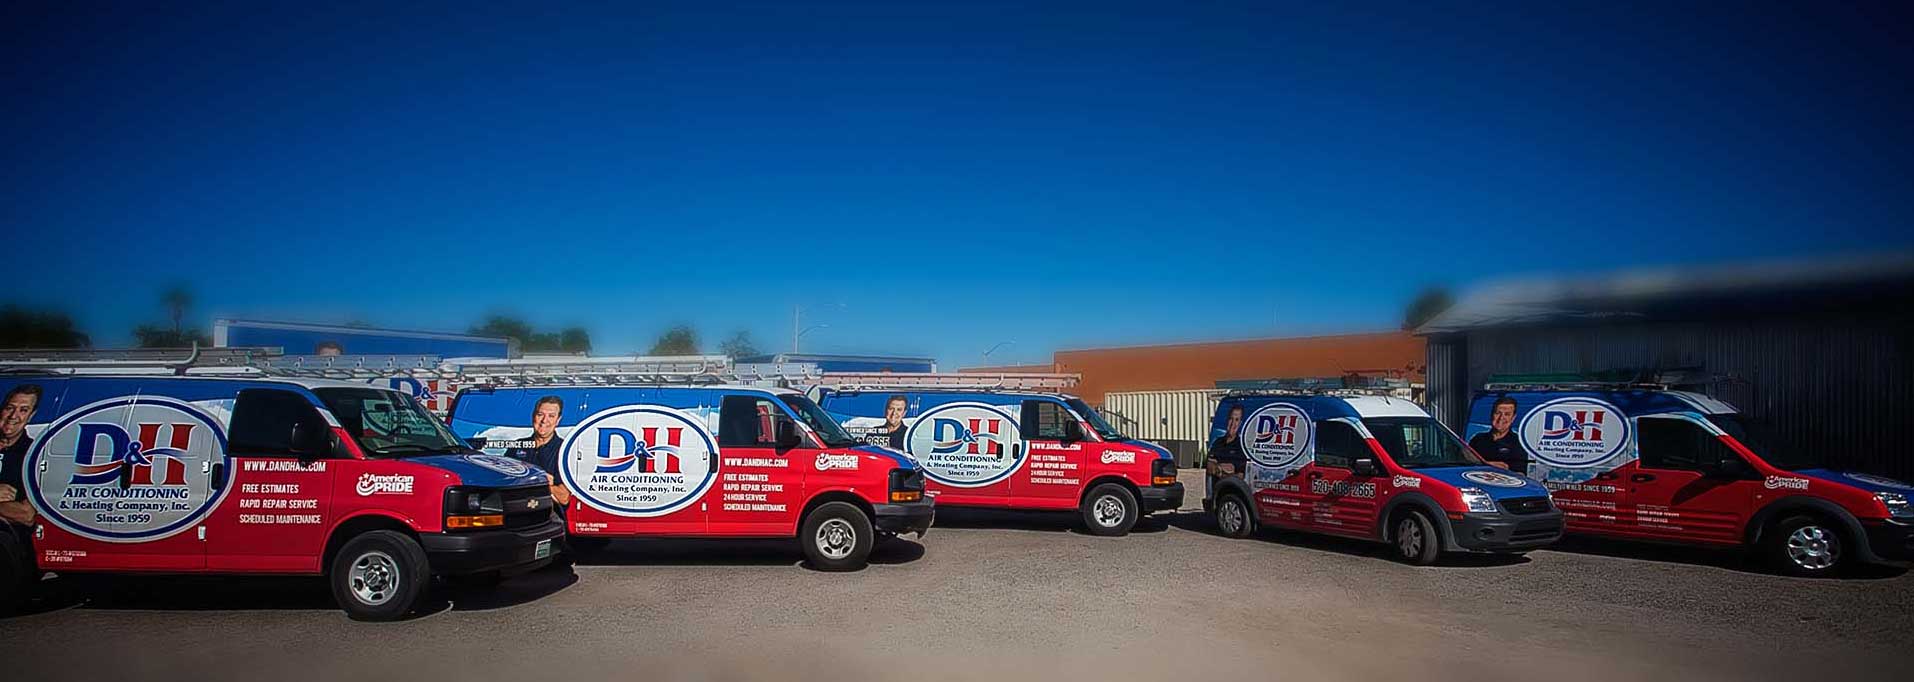 With D&H AC you don't have to wait extra time to see a technician repair your air conditioner